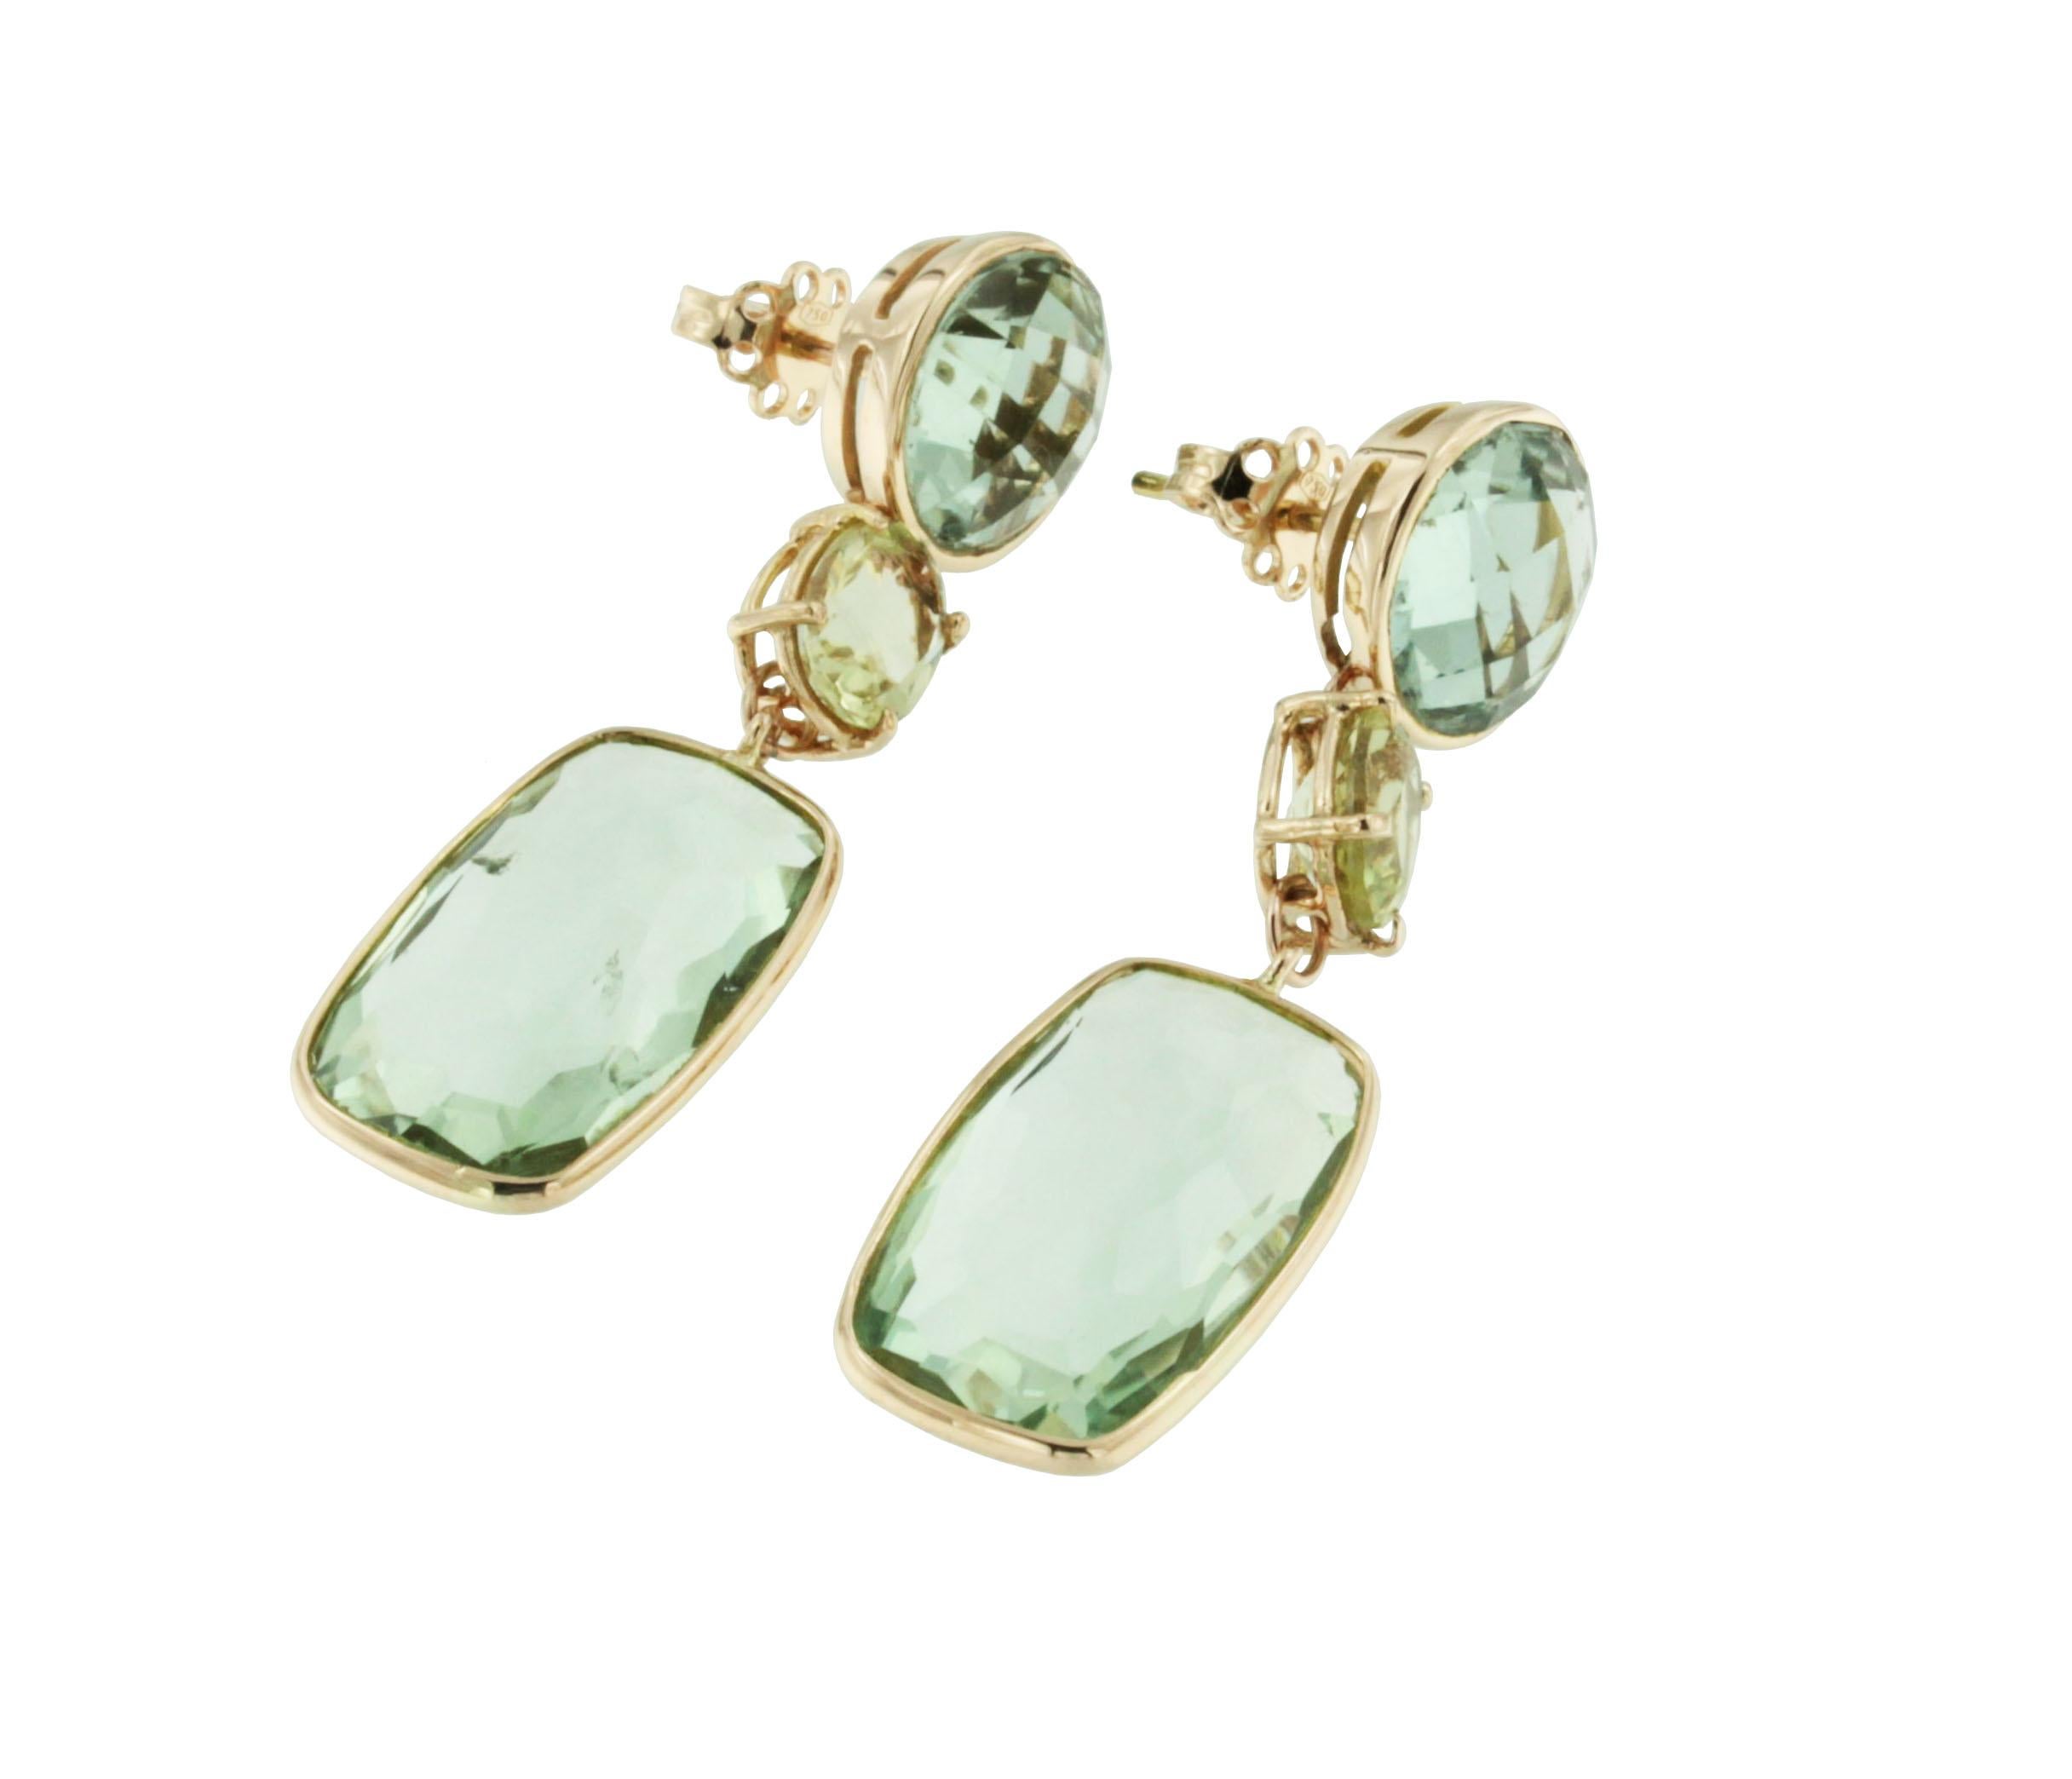 Combination of shapes and light colors made a unique fashion and modern amazing earrings in 18k rose gold with delicate light green Prasiolite. Made in Italy by Stanoppi Jewellery since 1948.

(round cut, size:12 mm; oval cut size:7x9 mm;